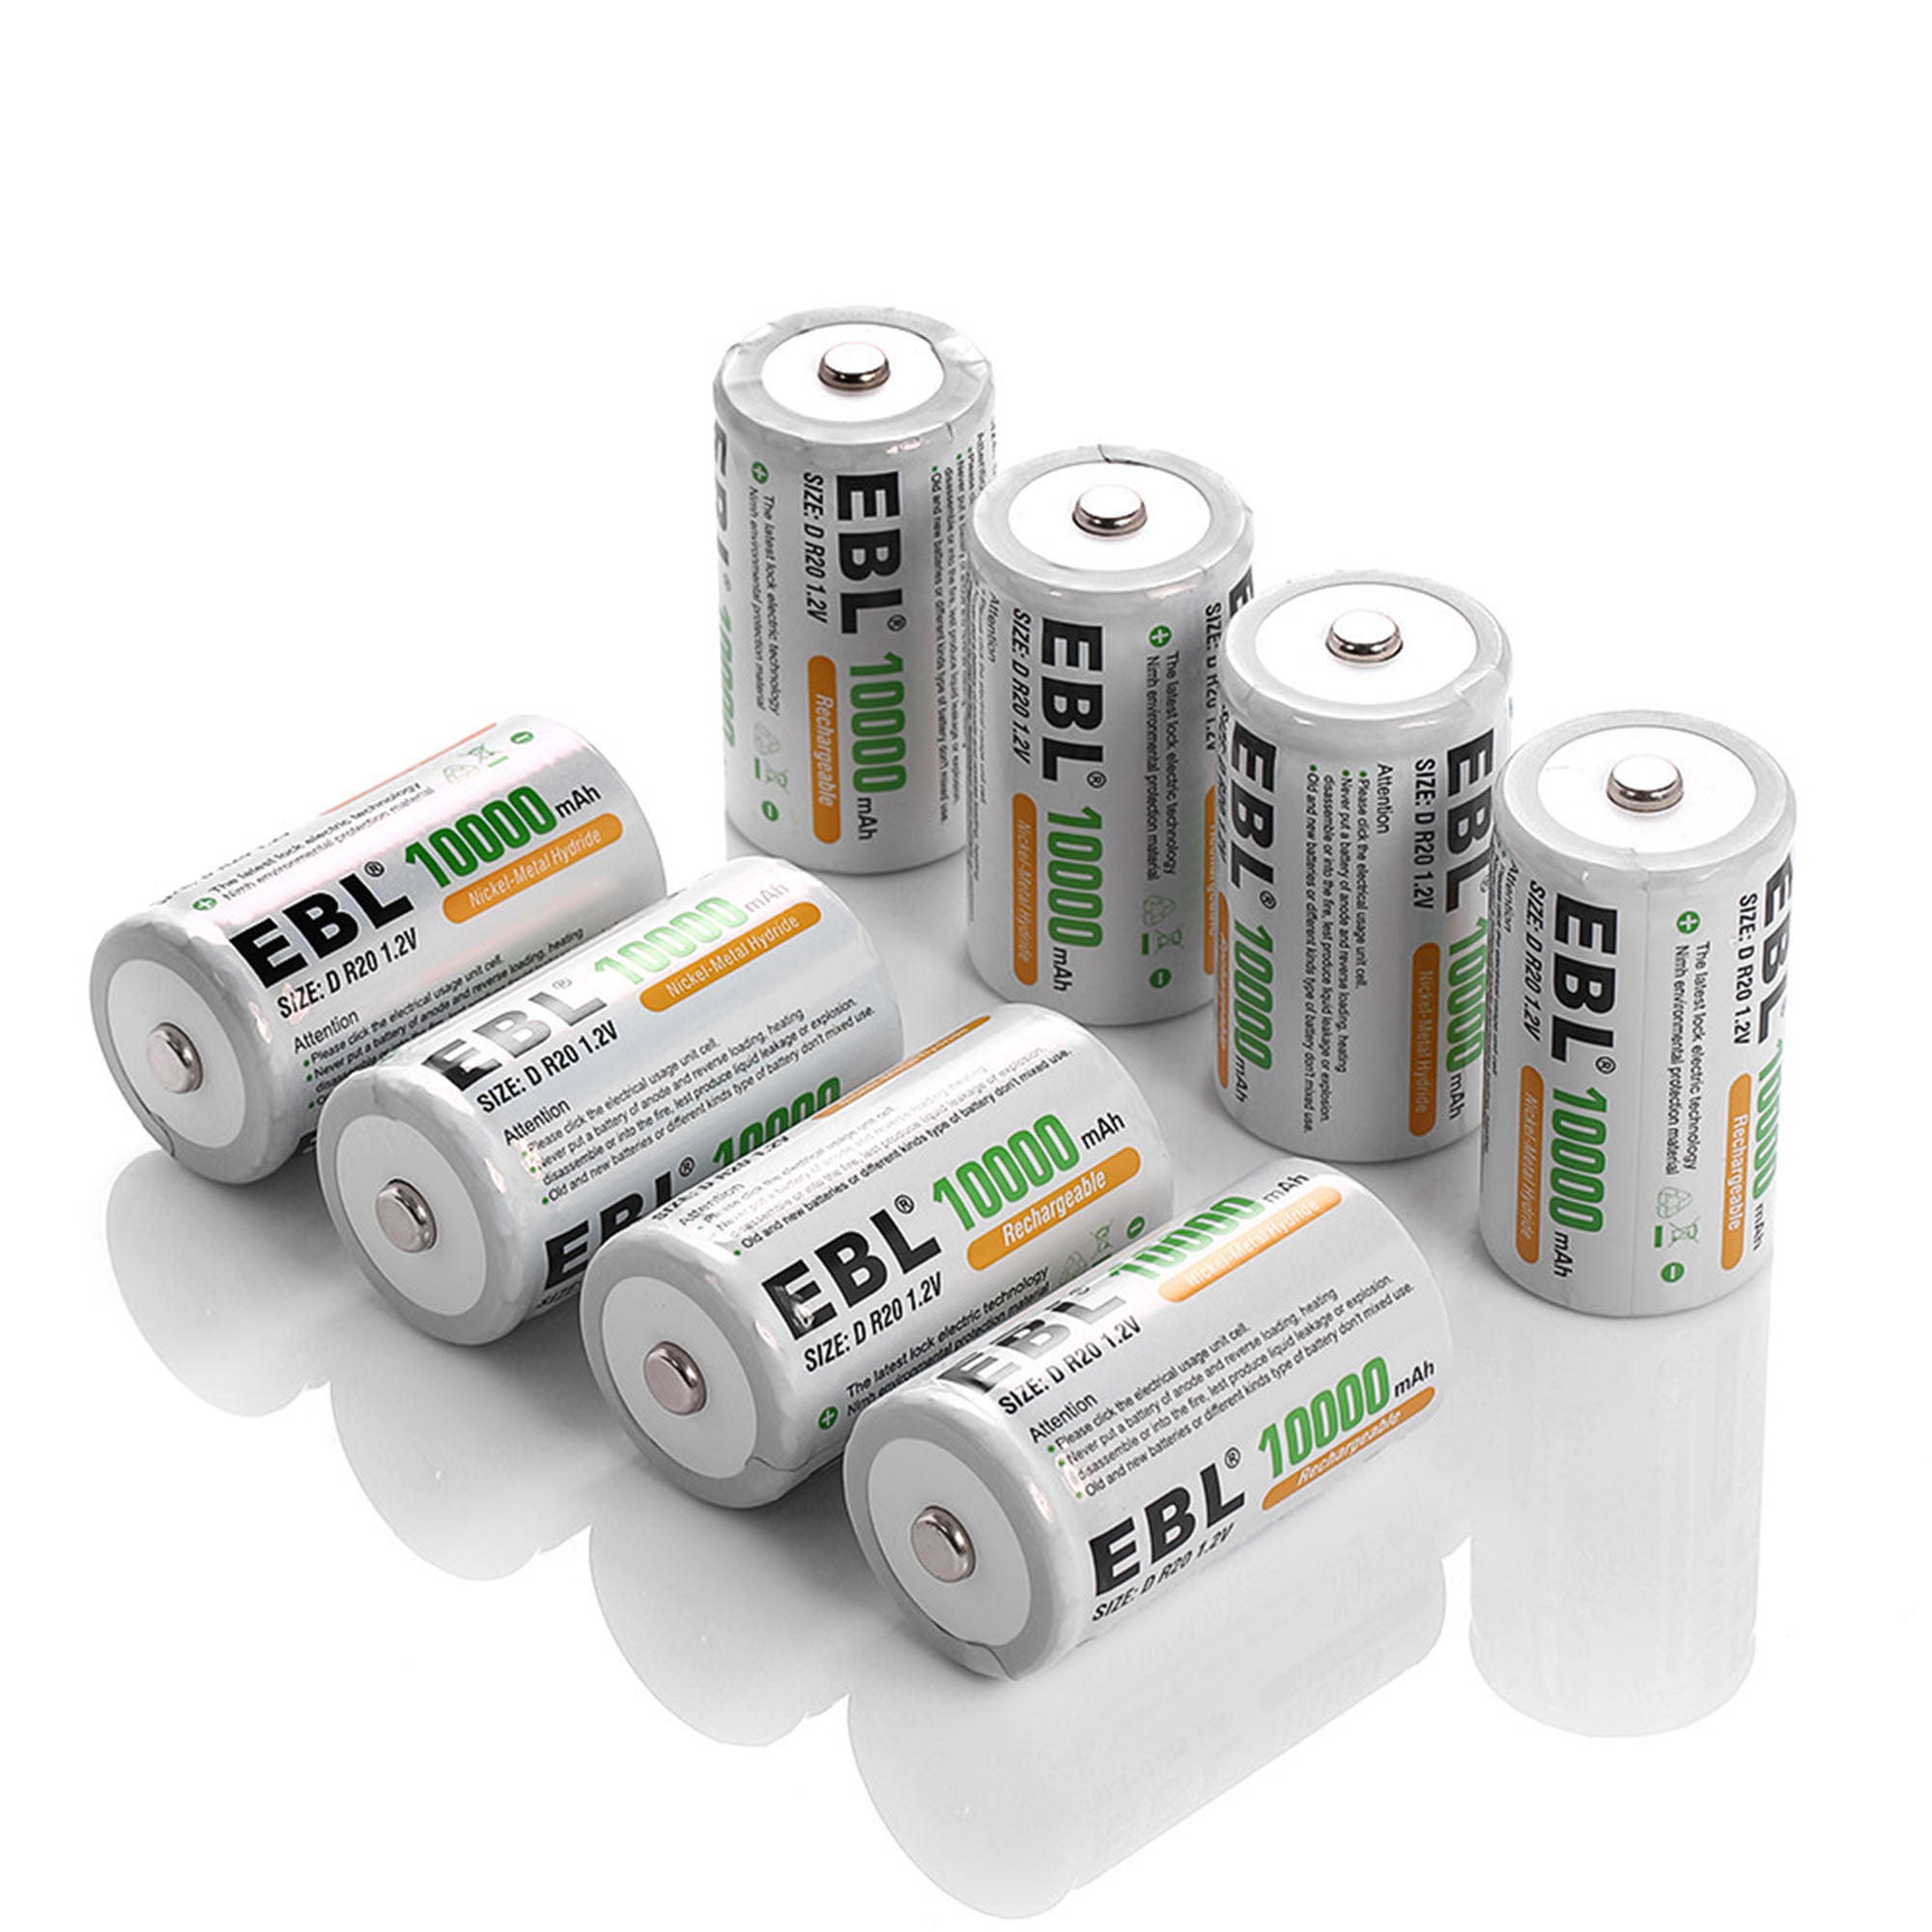 EBL Pack of 8 10000mAh Ni-MH D Cells Rechargeable Batteries, Battery Case  Inc